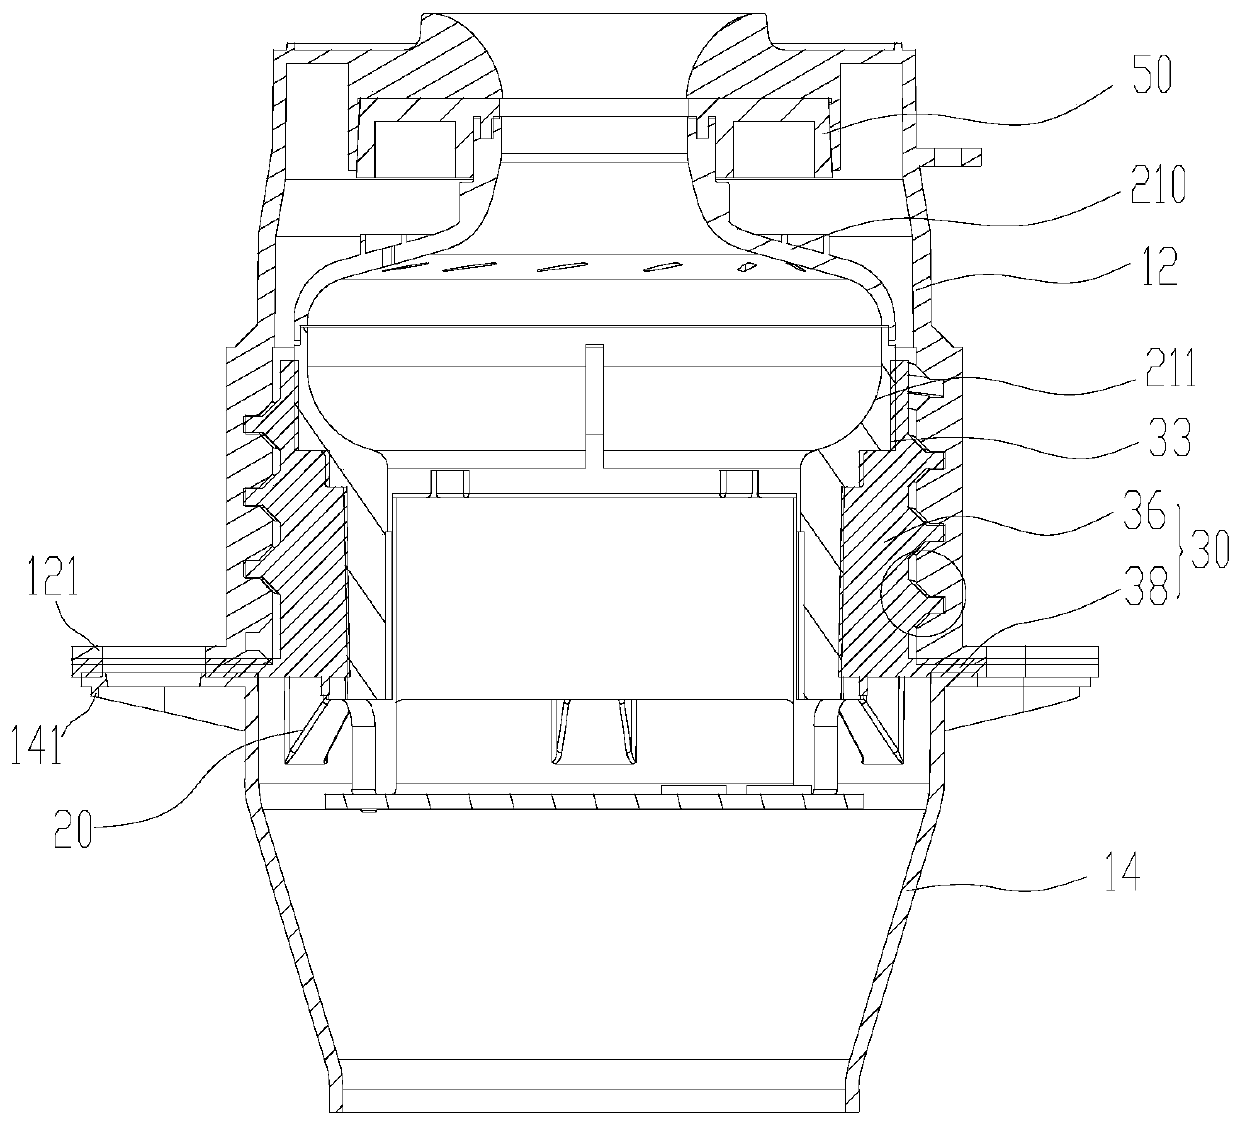 Motor cover, motor assembly and dust collector